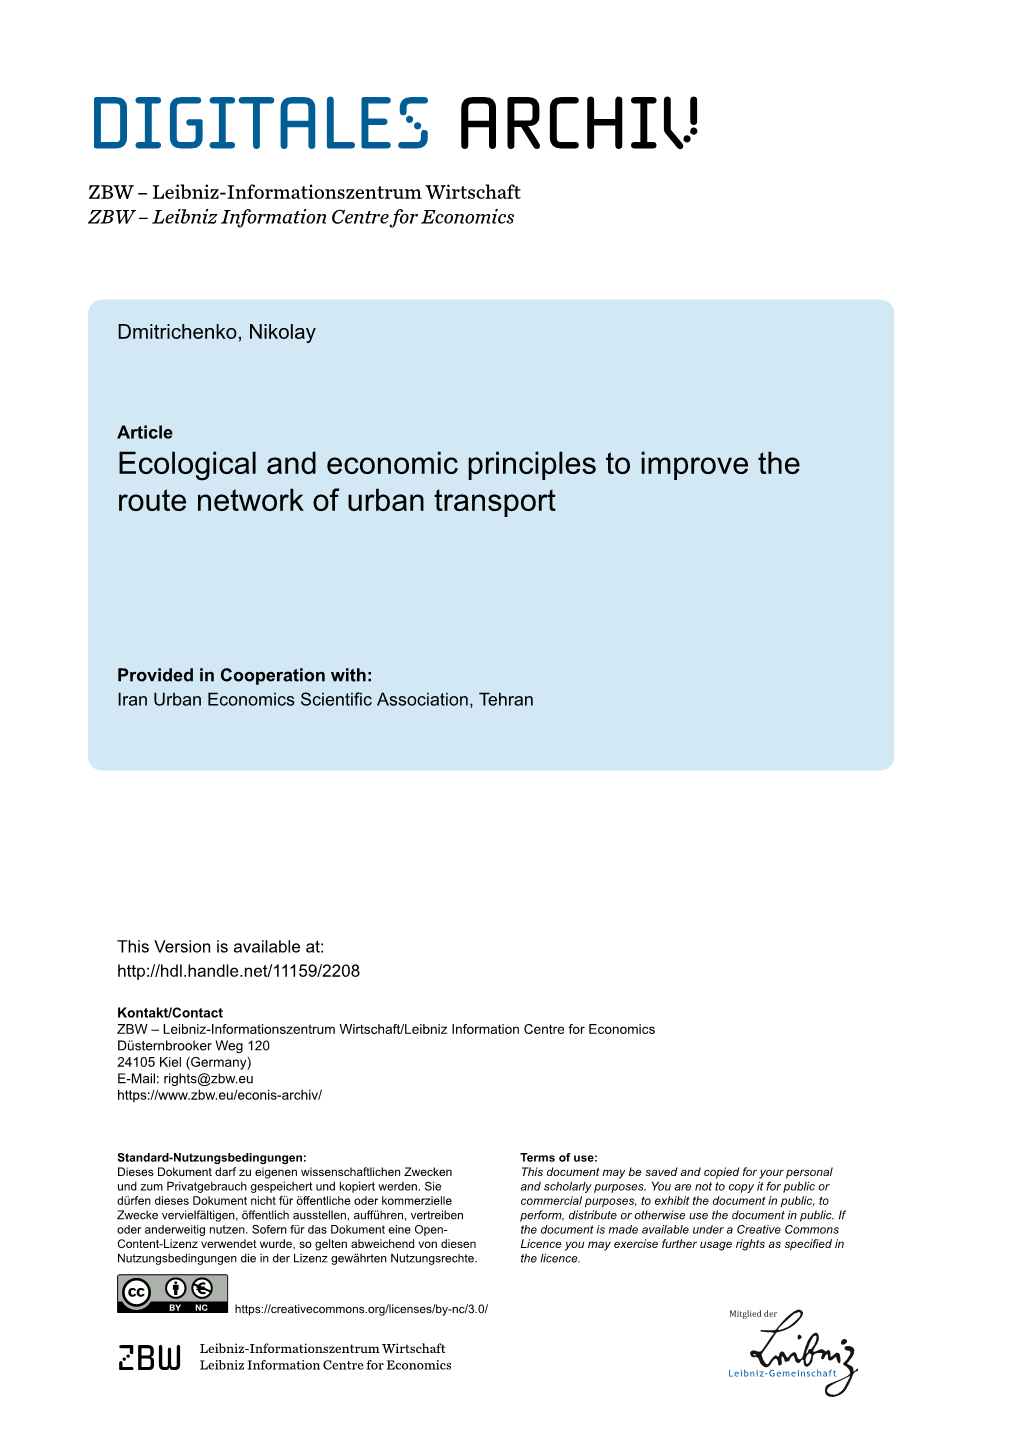 Ecological and Economic Principles to Improve the Route Network of Urban Transport